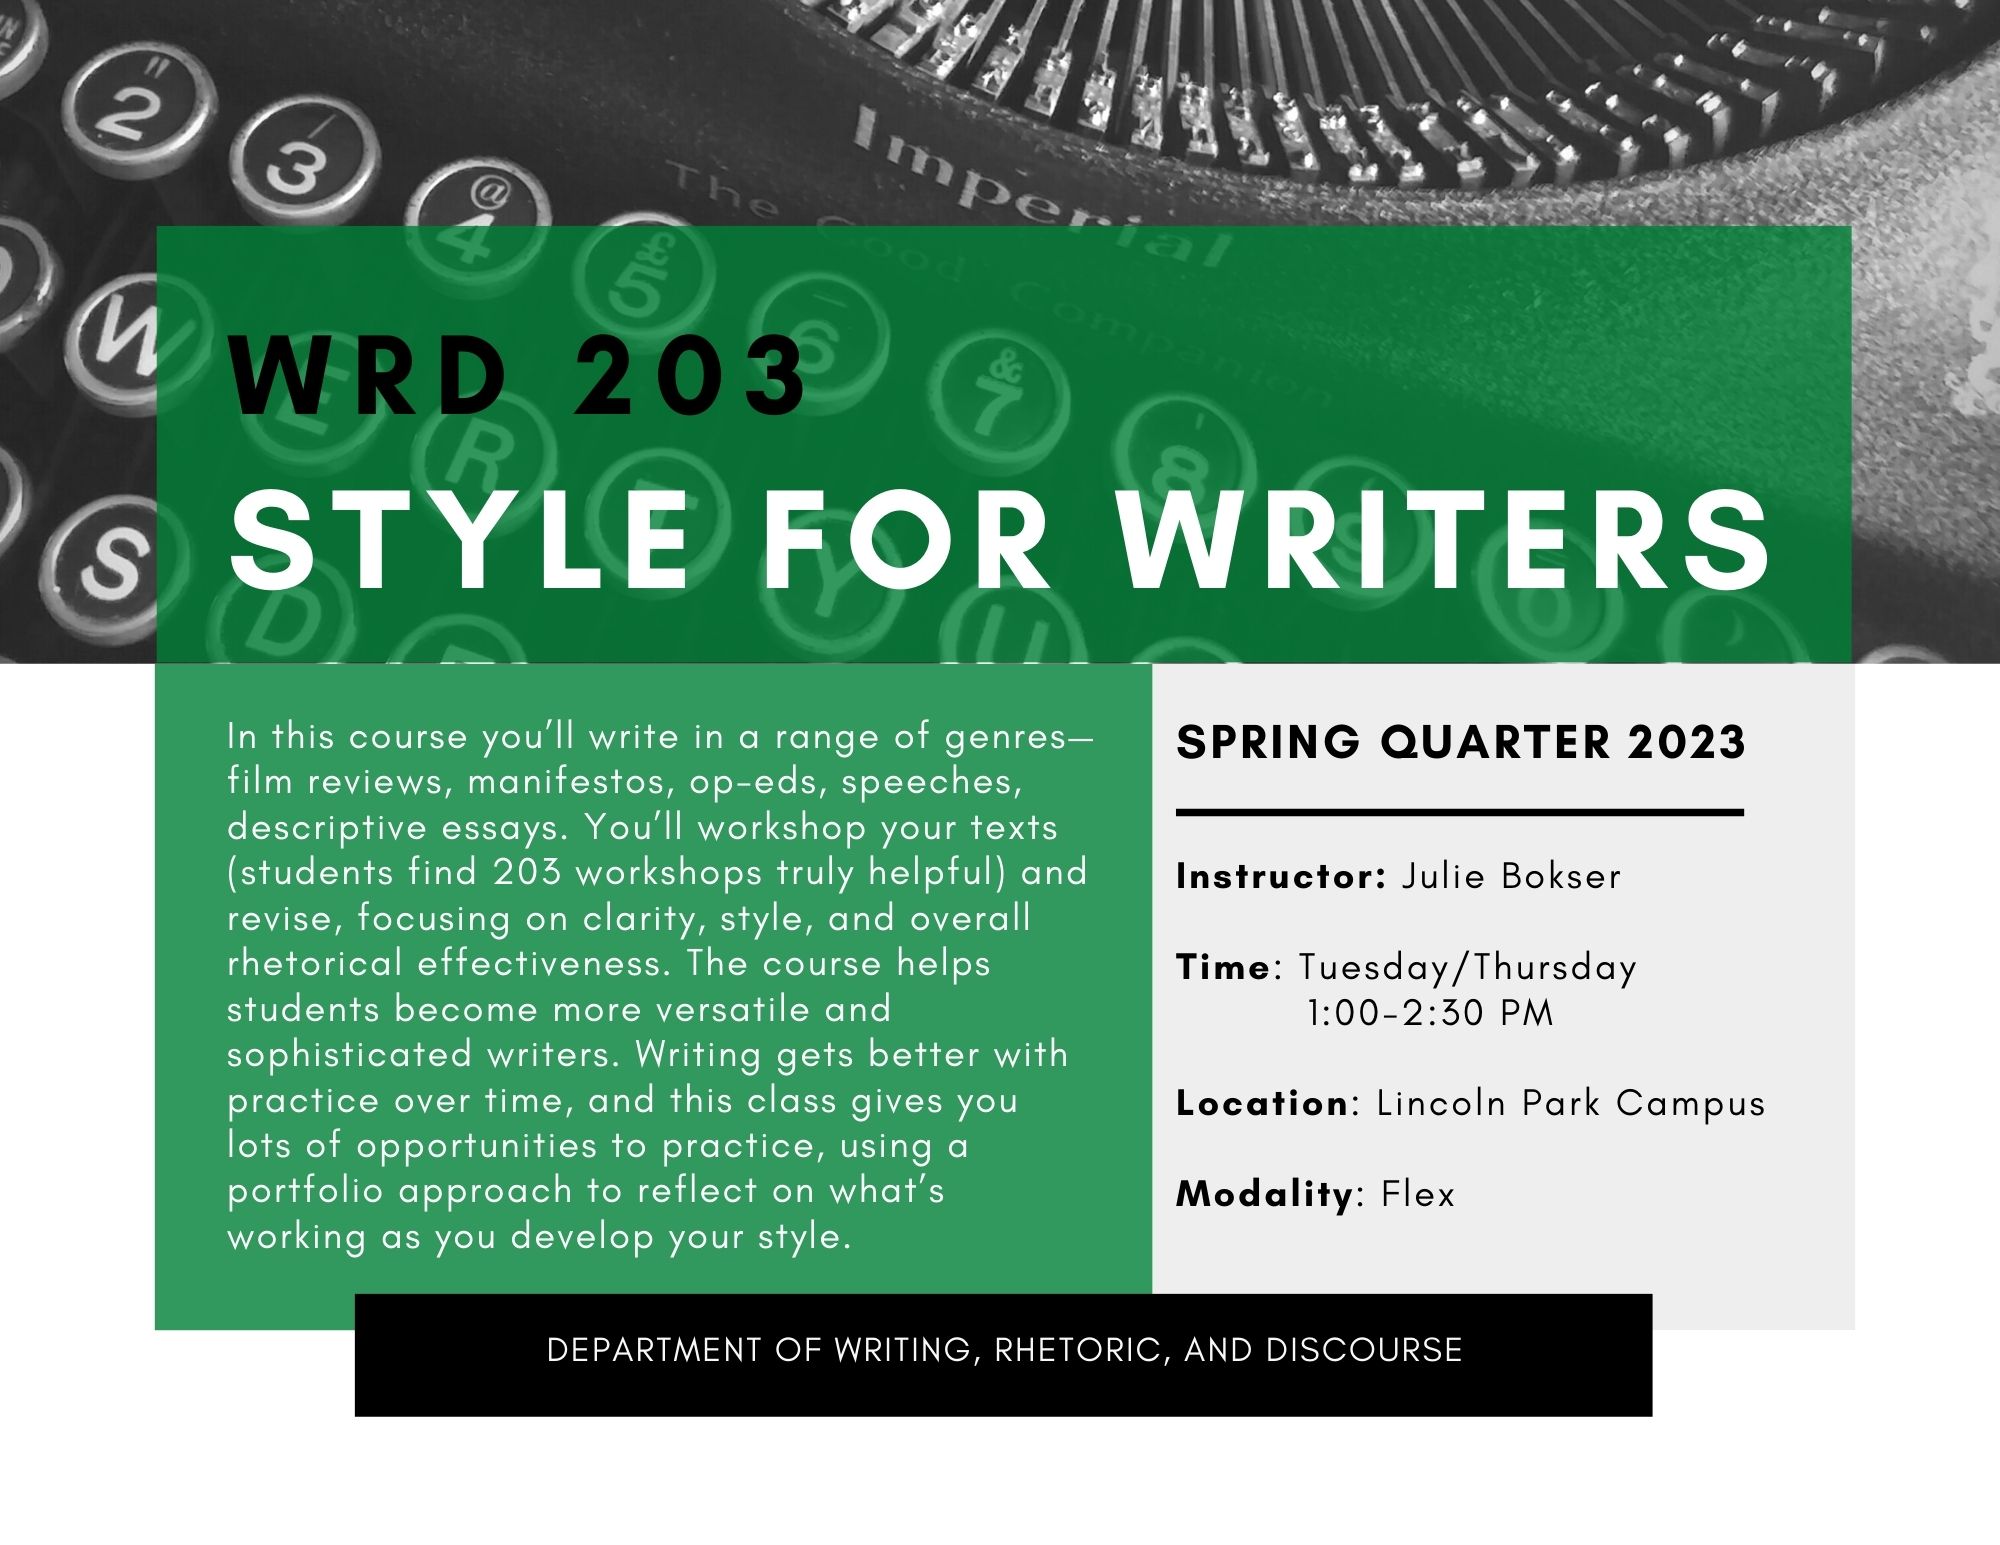 WRD 203: Style for Writers